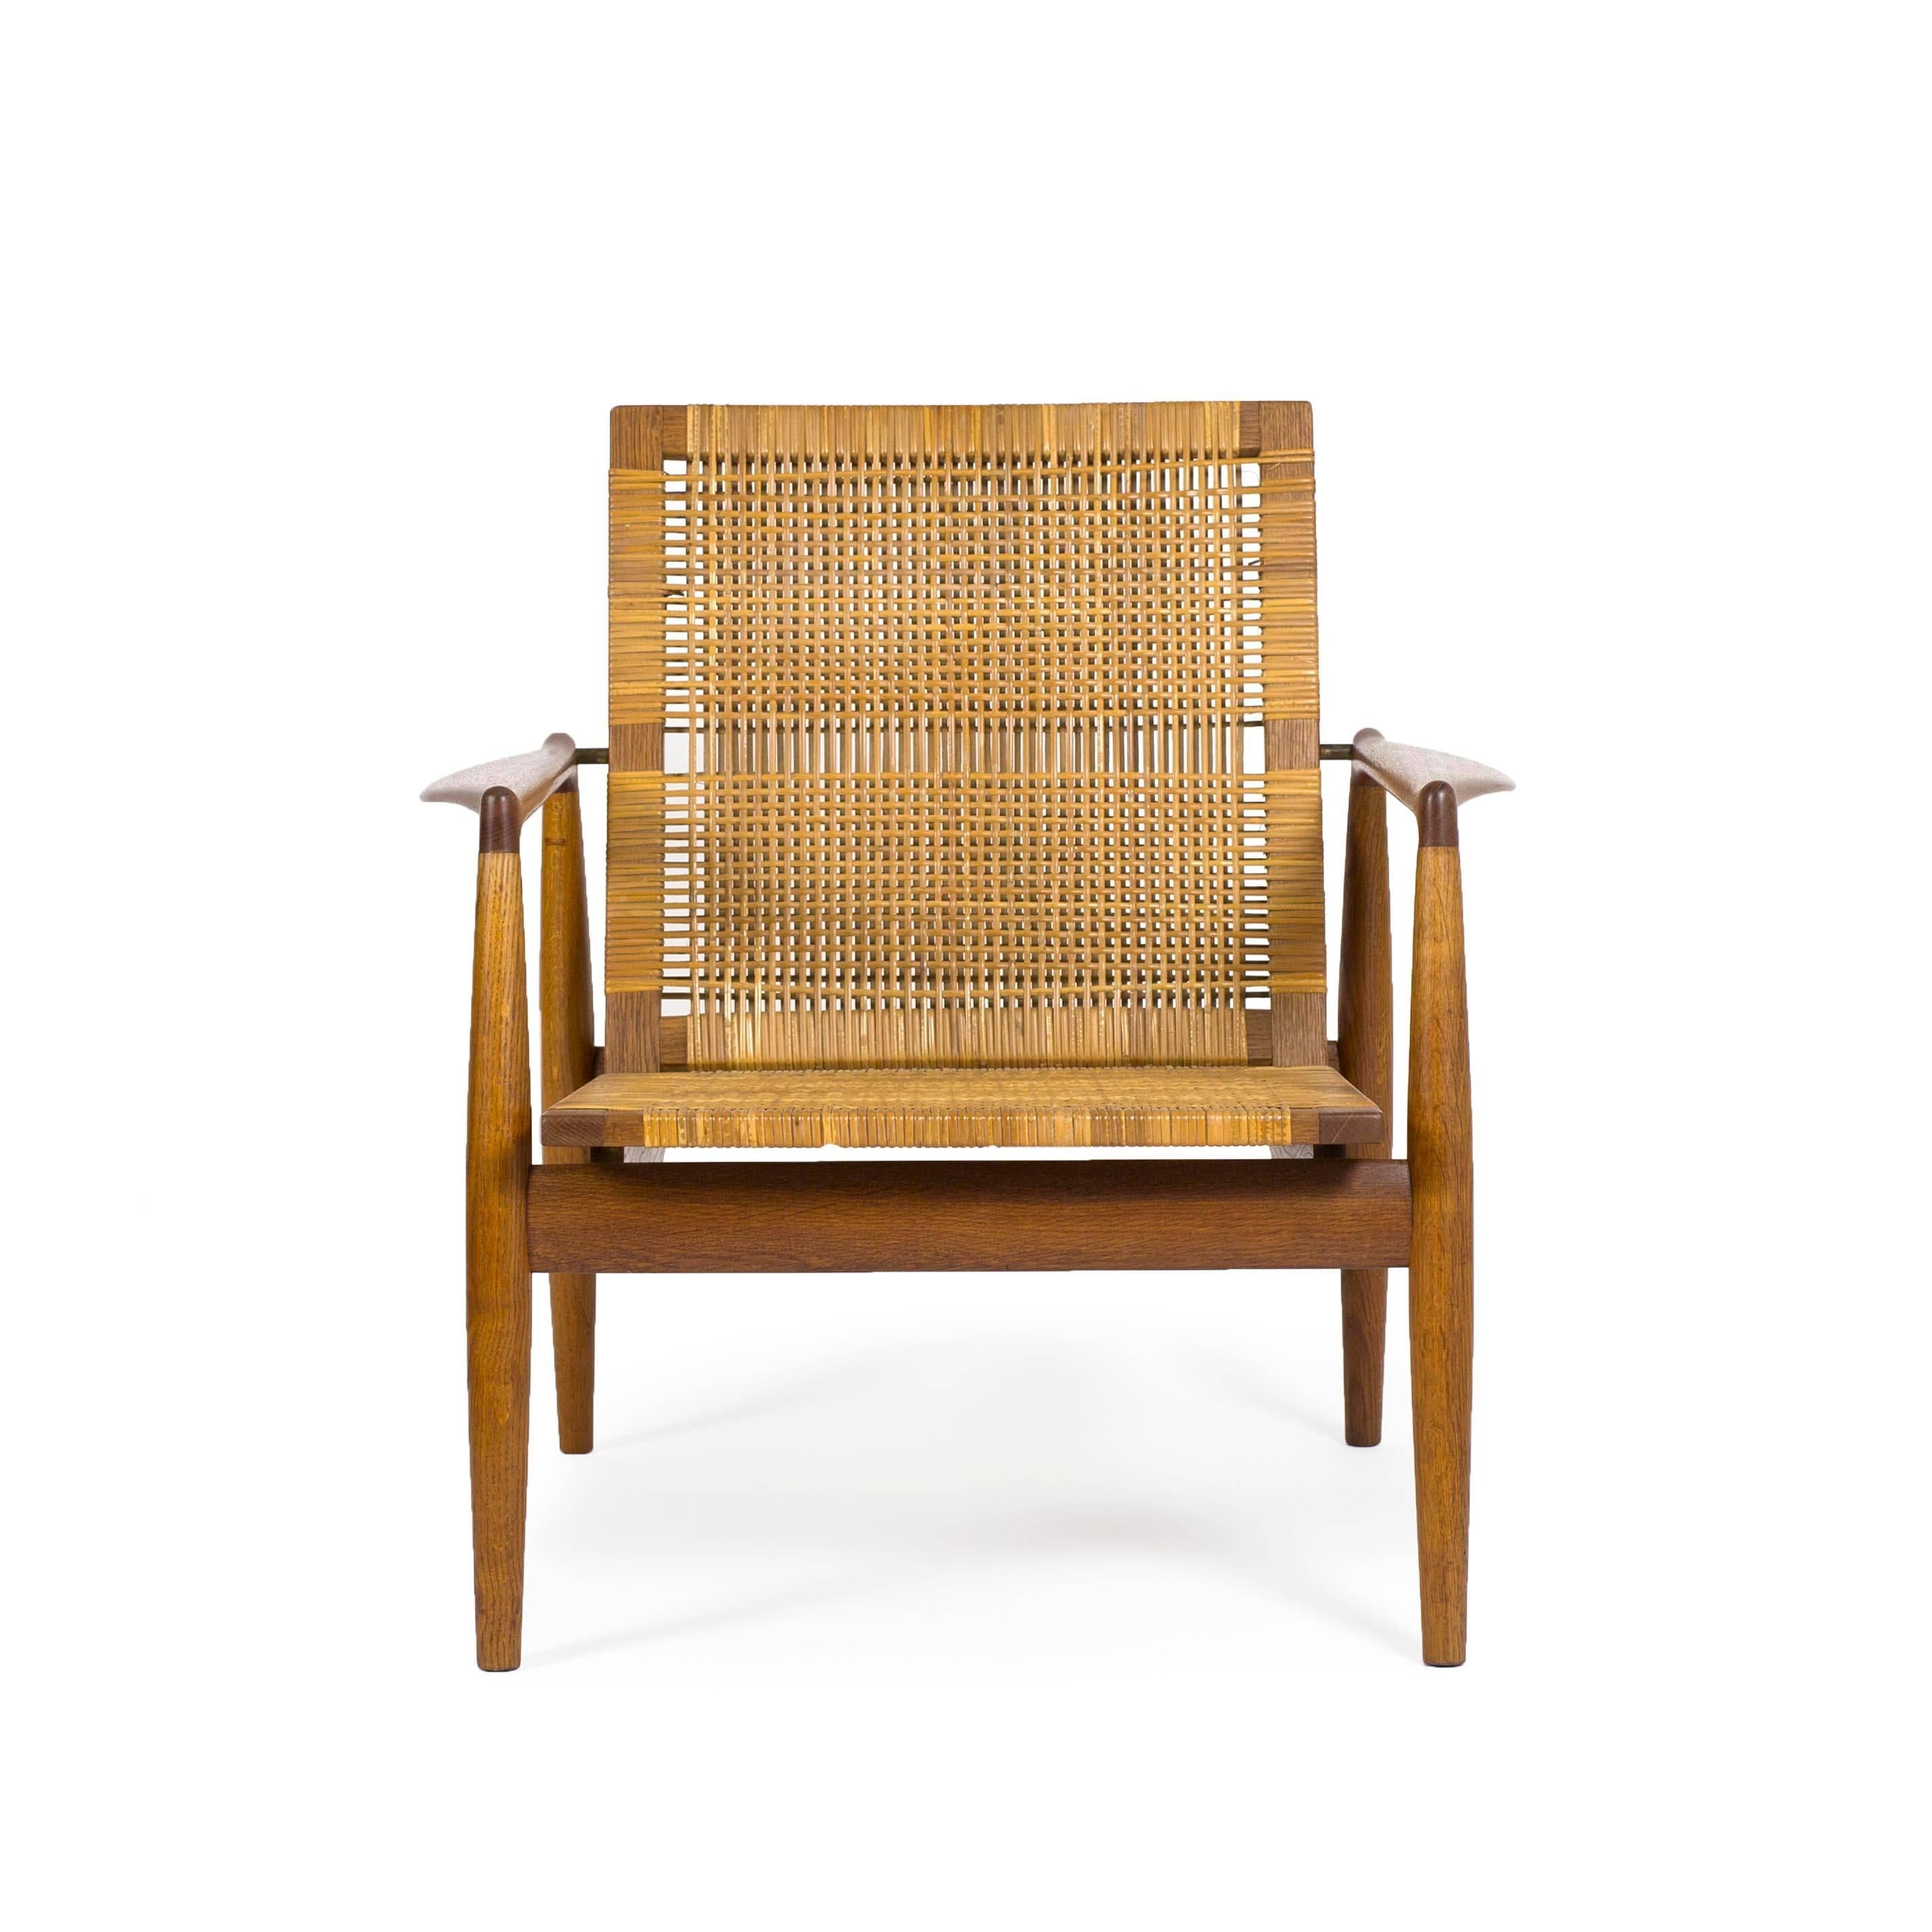 Finn Juhl easy chair with frame of original patinated oak, arms of teak, back and seat upholstered with woven cane. 

Designed by Finn Juhl 1954, manufactured by Søren Willadsen, Denmark 1950s, model SW96. Executed in a limited number. 

Very